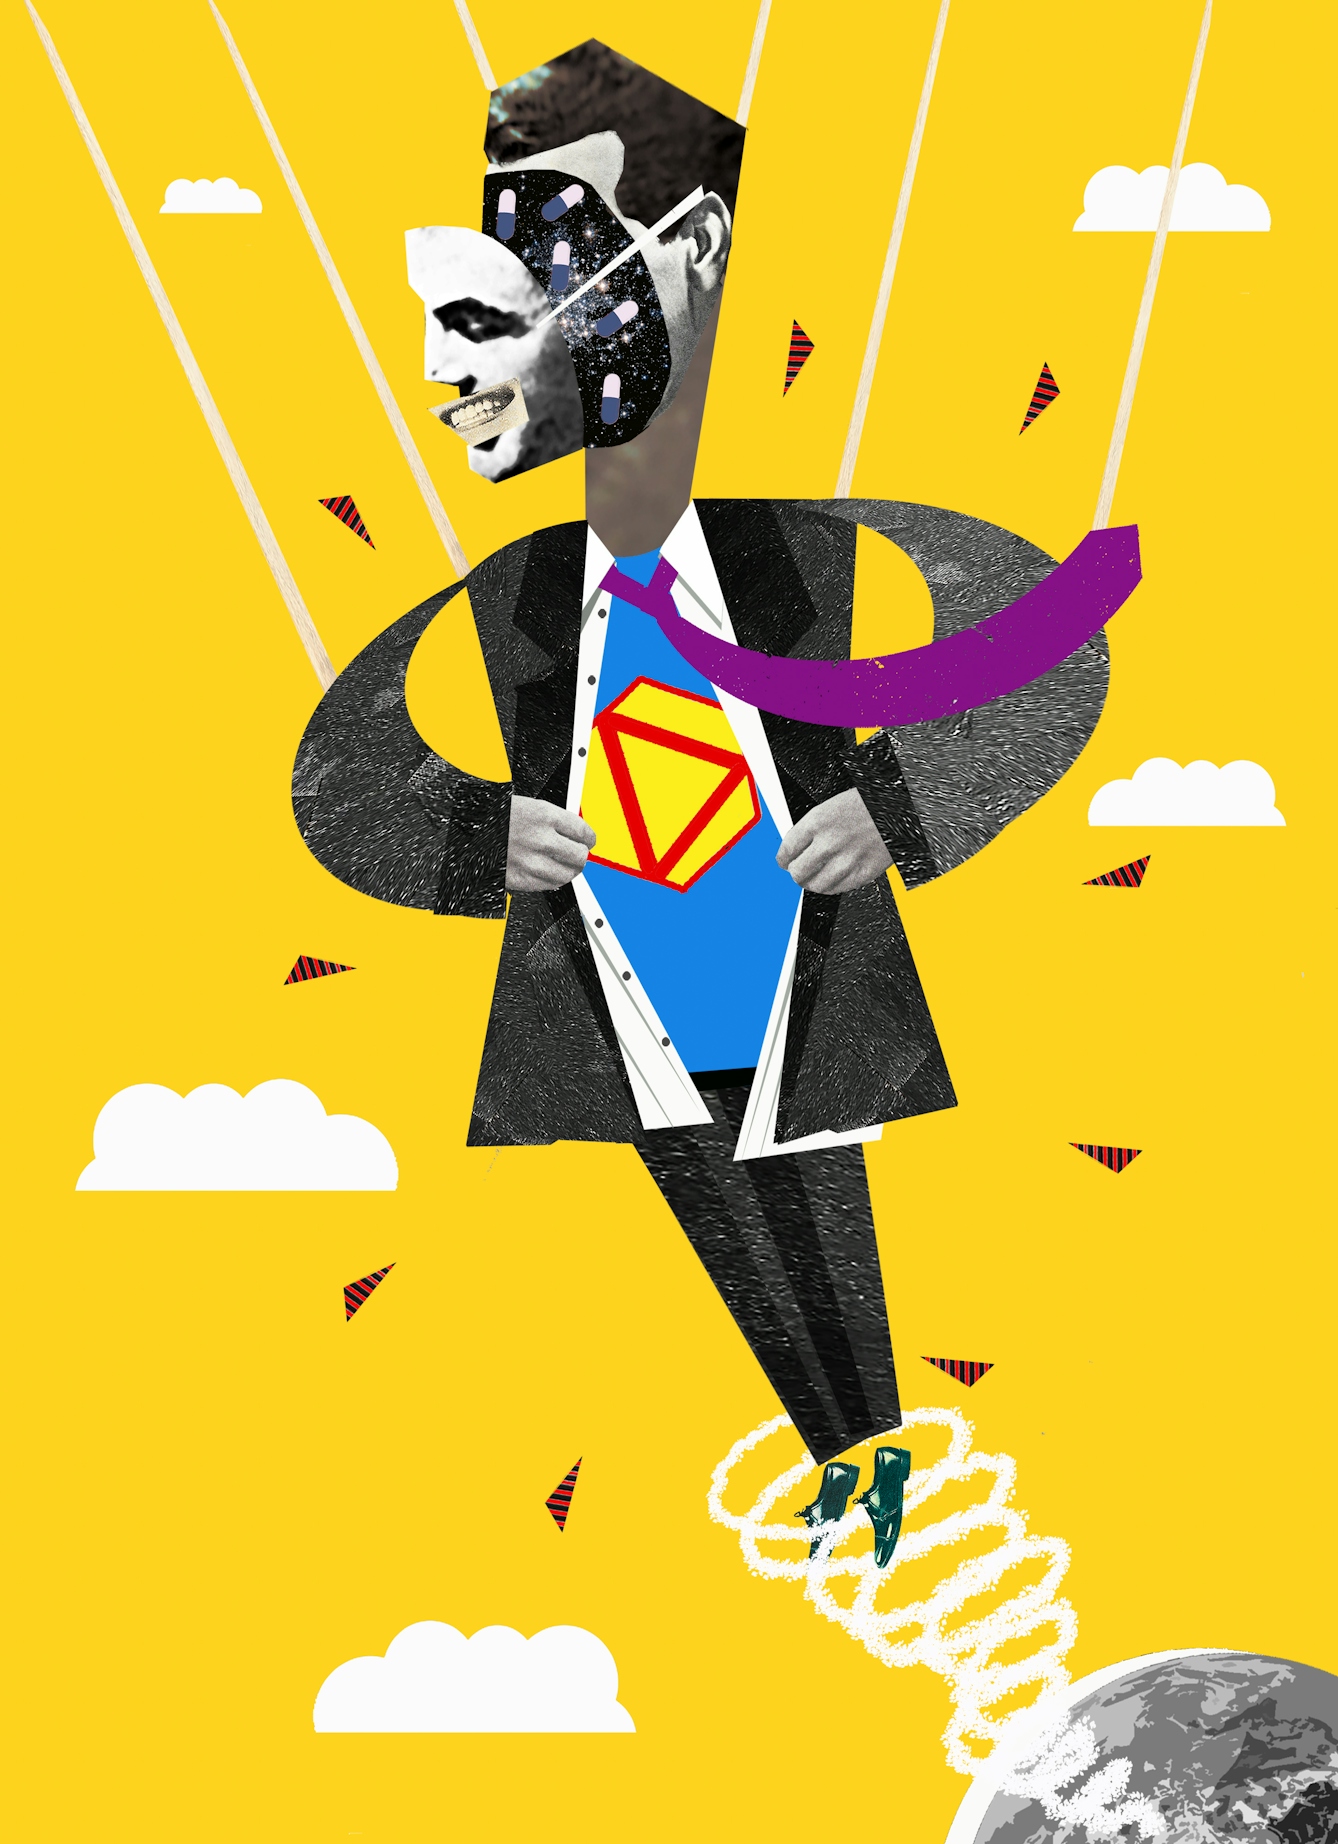 Illustration using a montage technique combining monotone photographs and colour graphics, showing a man zooming up from a small planet earth in the bottom right corner, pulling his shirt apart to reveal a superman type shirt underneath. Hi face is smiling and detached from his head as if a mask on a length of elastic. Inside his head are galactic stars and small white and blue pill capsules.